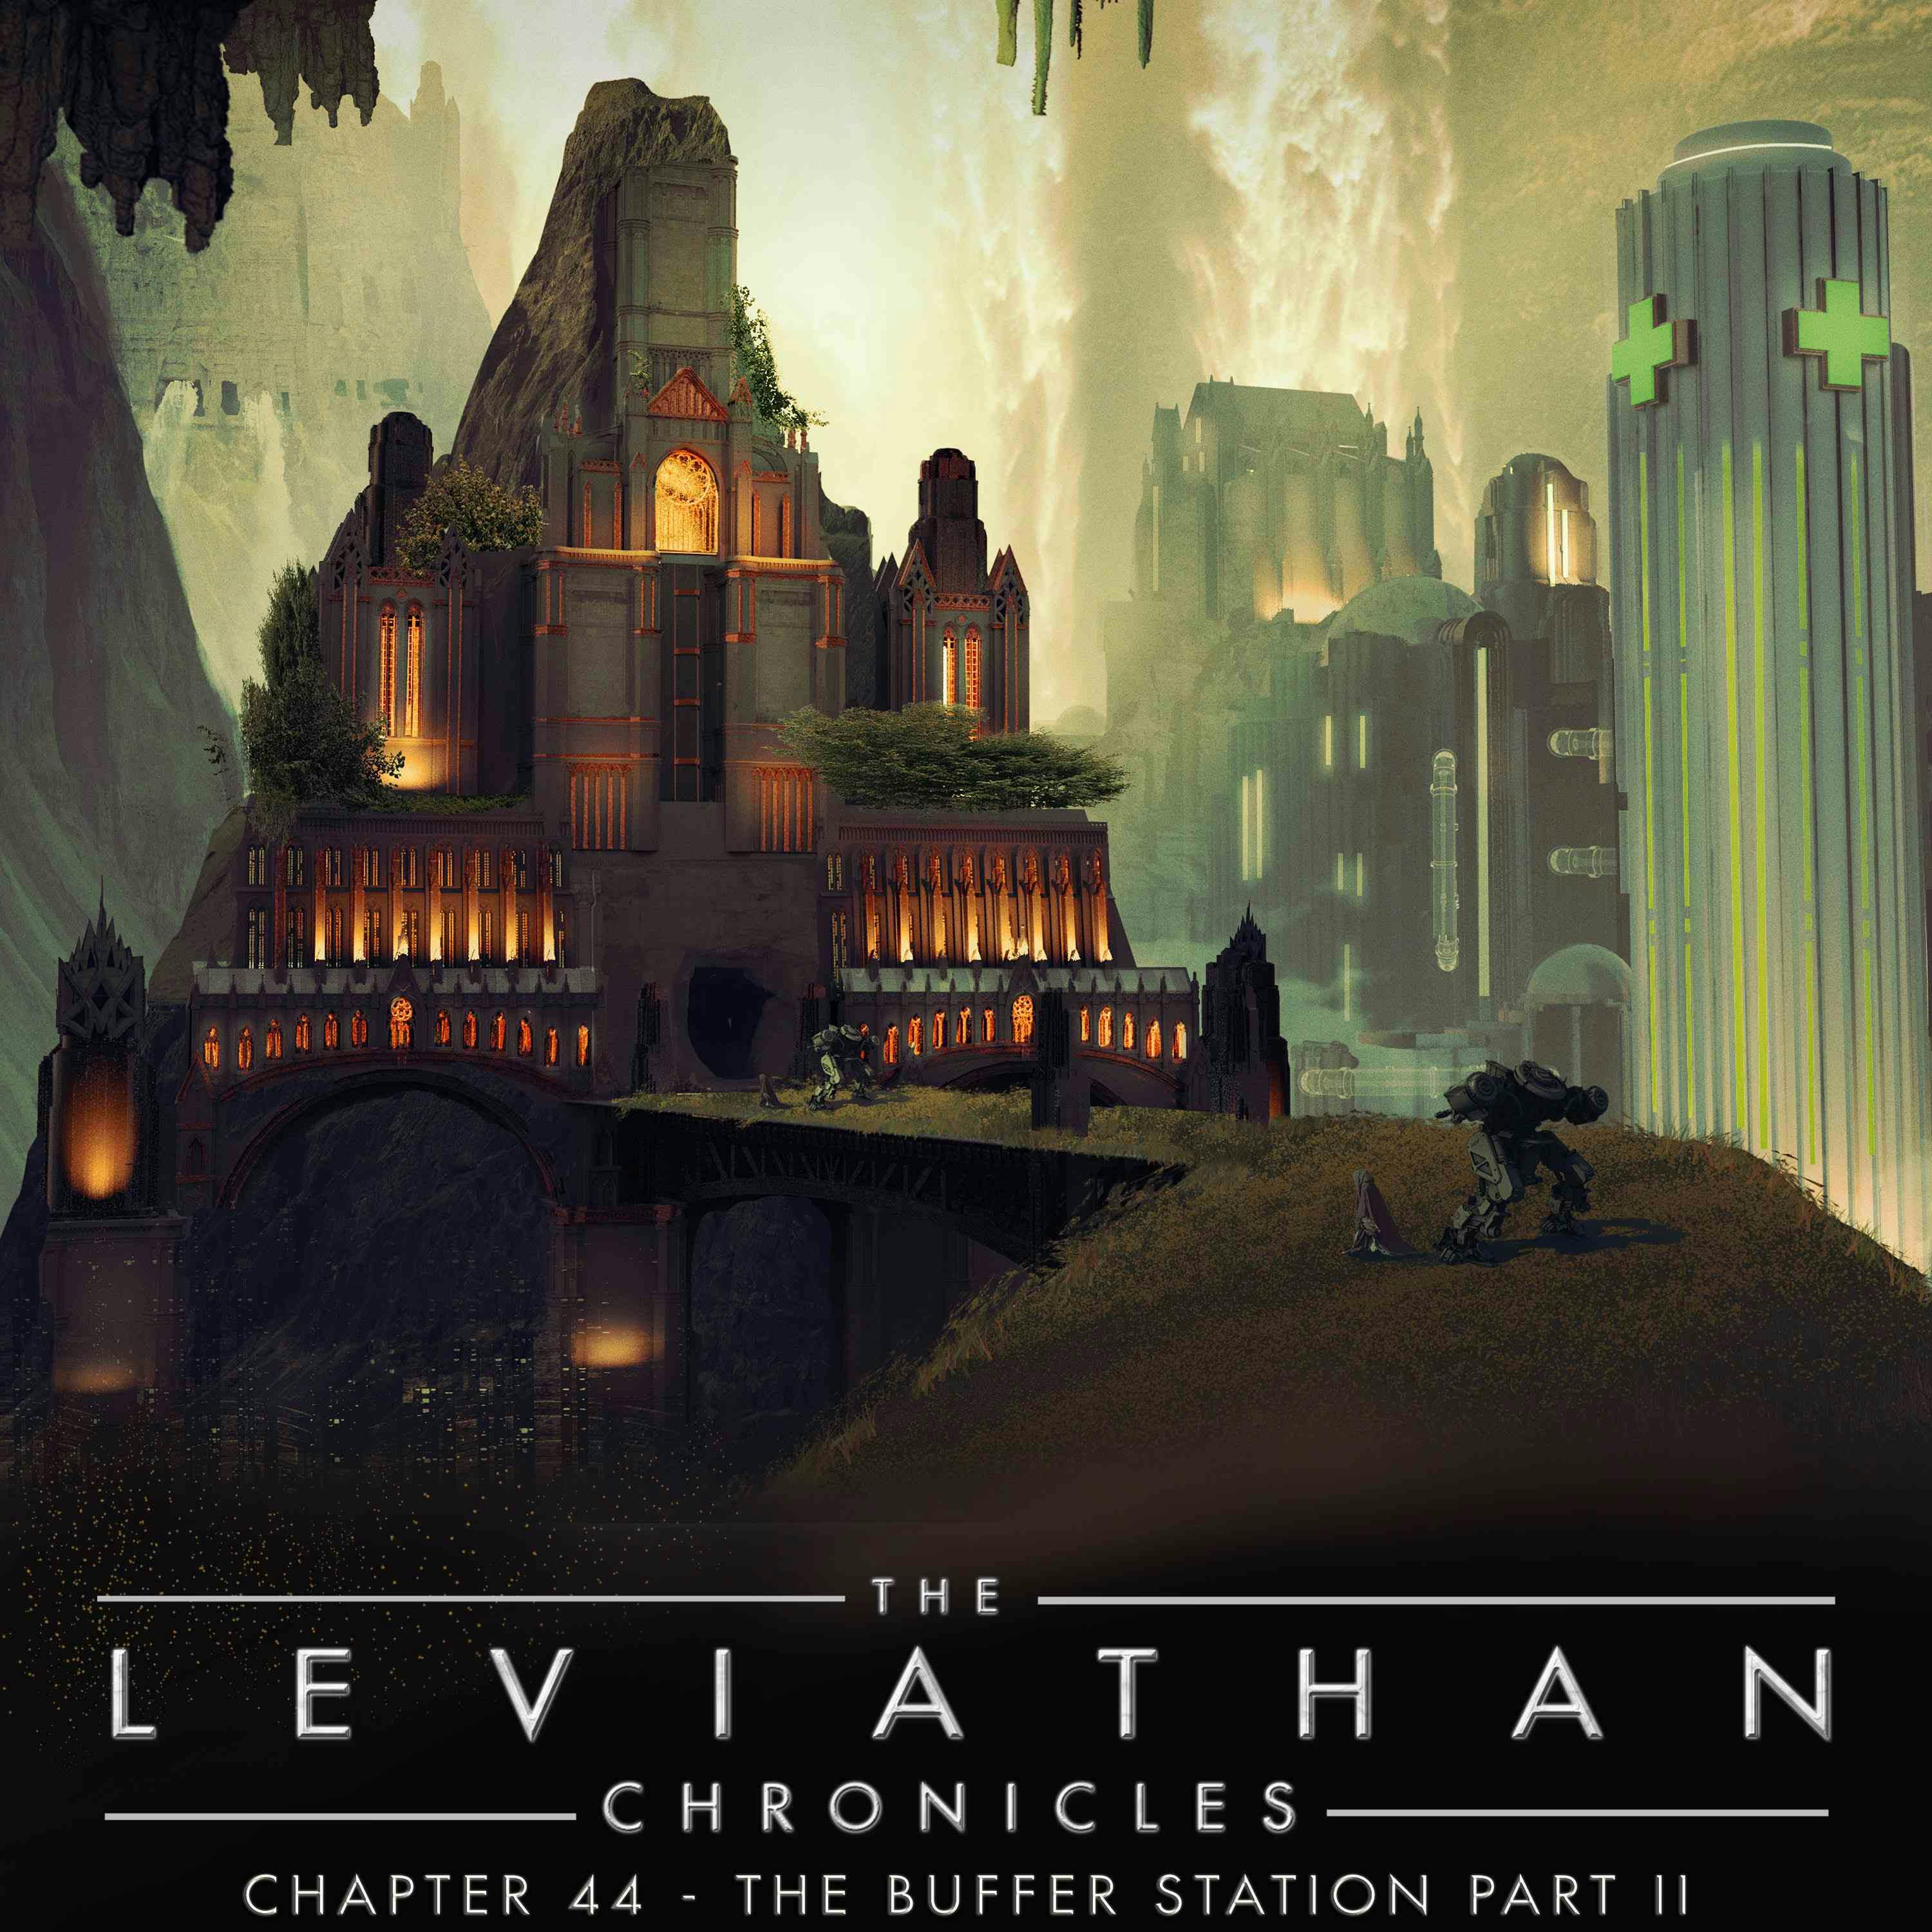 The Leviathan Chronicles | Chapter 44 - The Buffer Station Part II